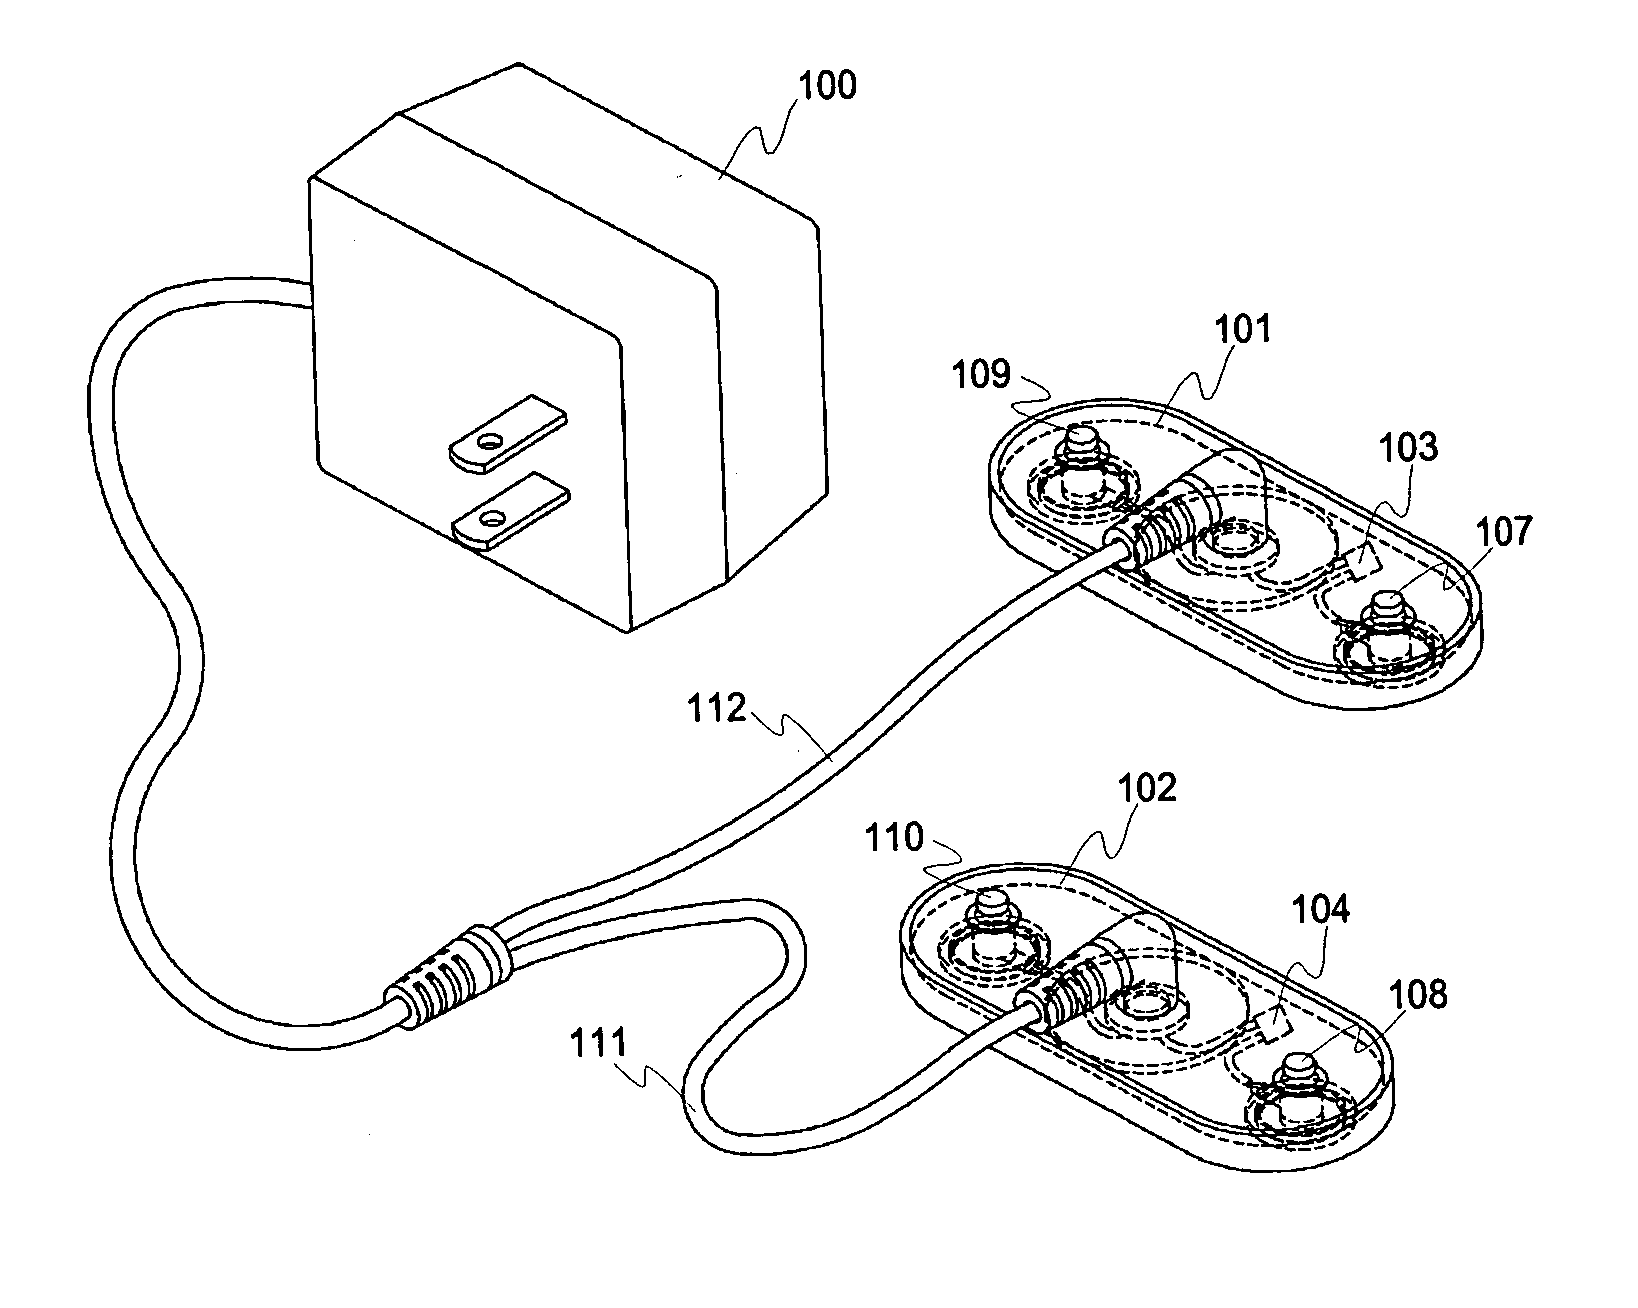 Electronic toy and teaching aid safety devices